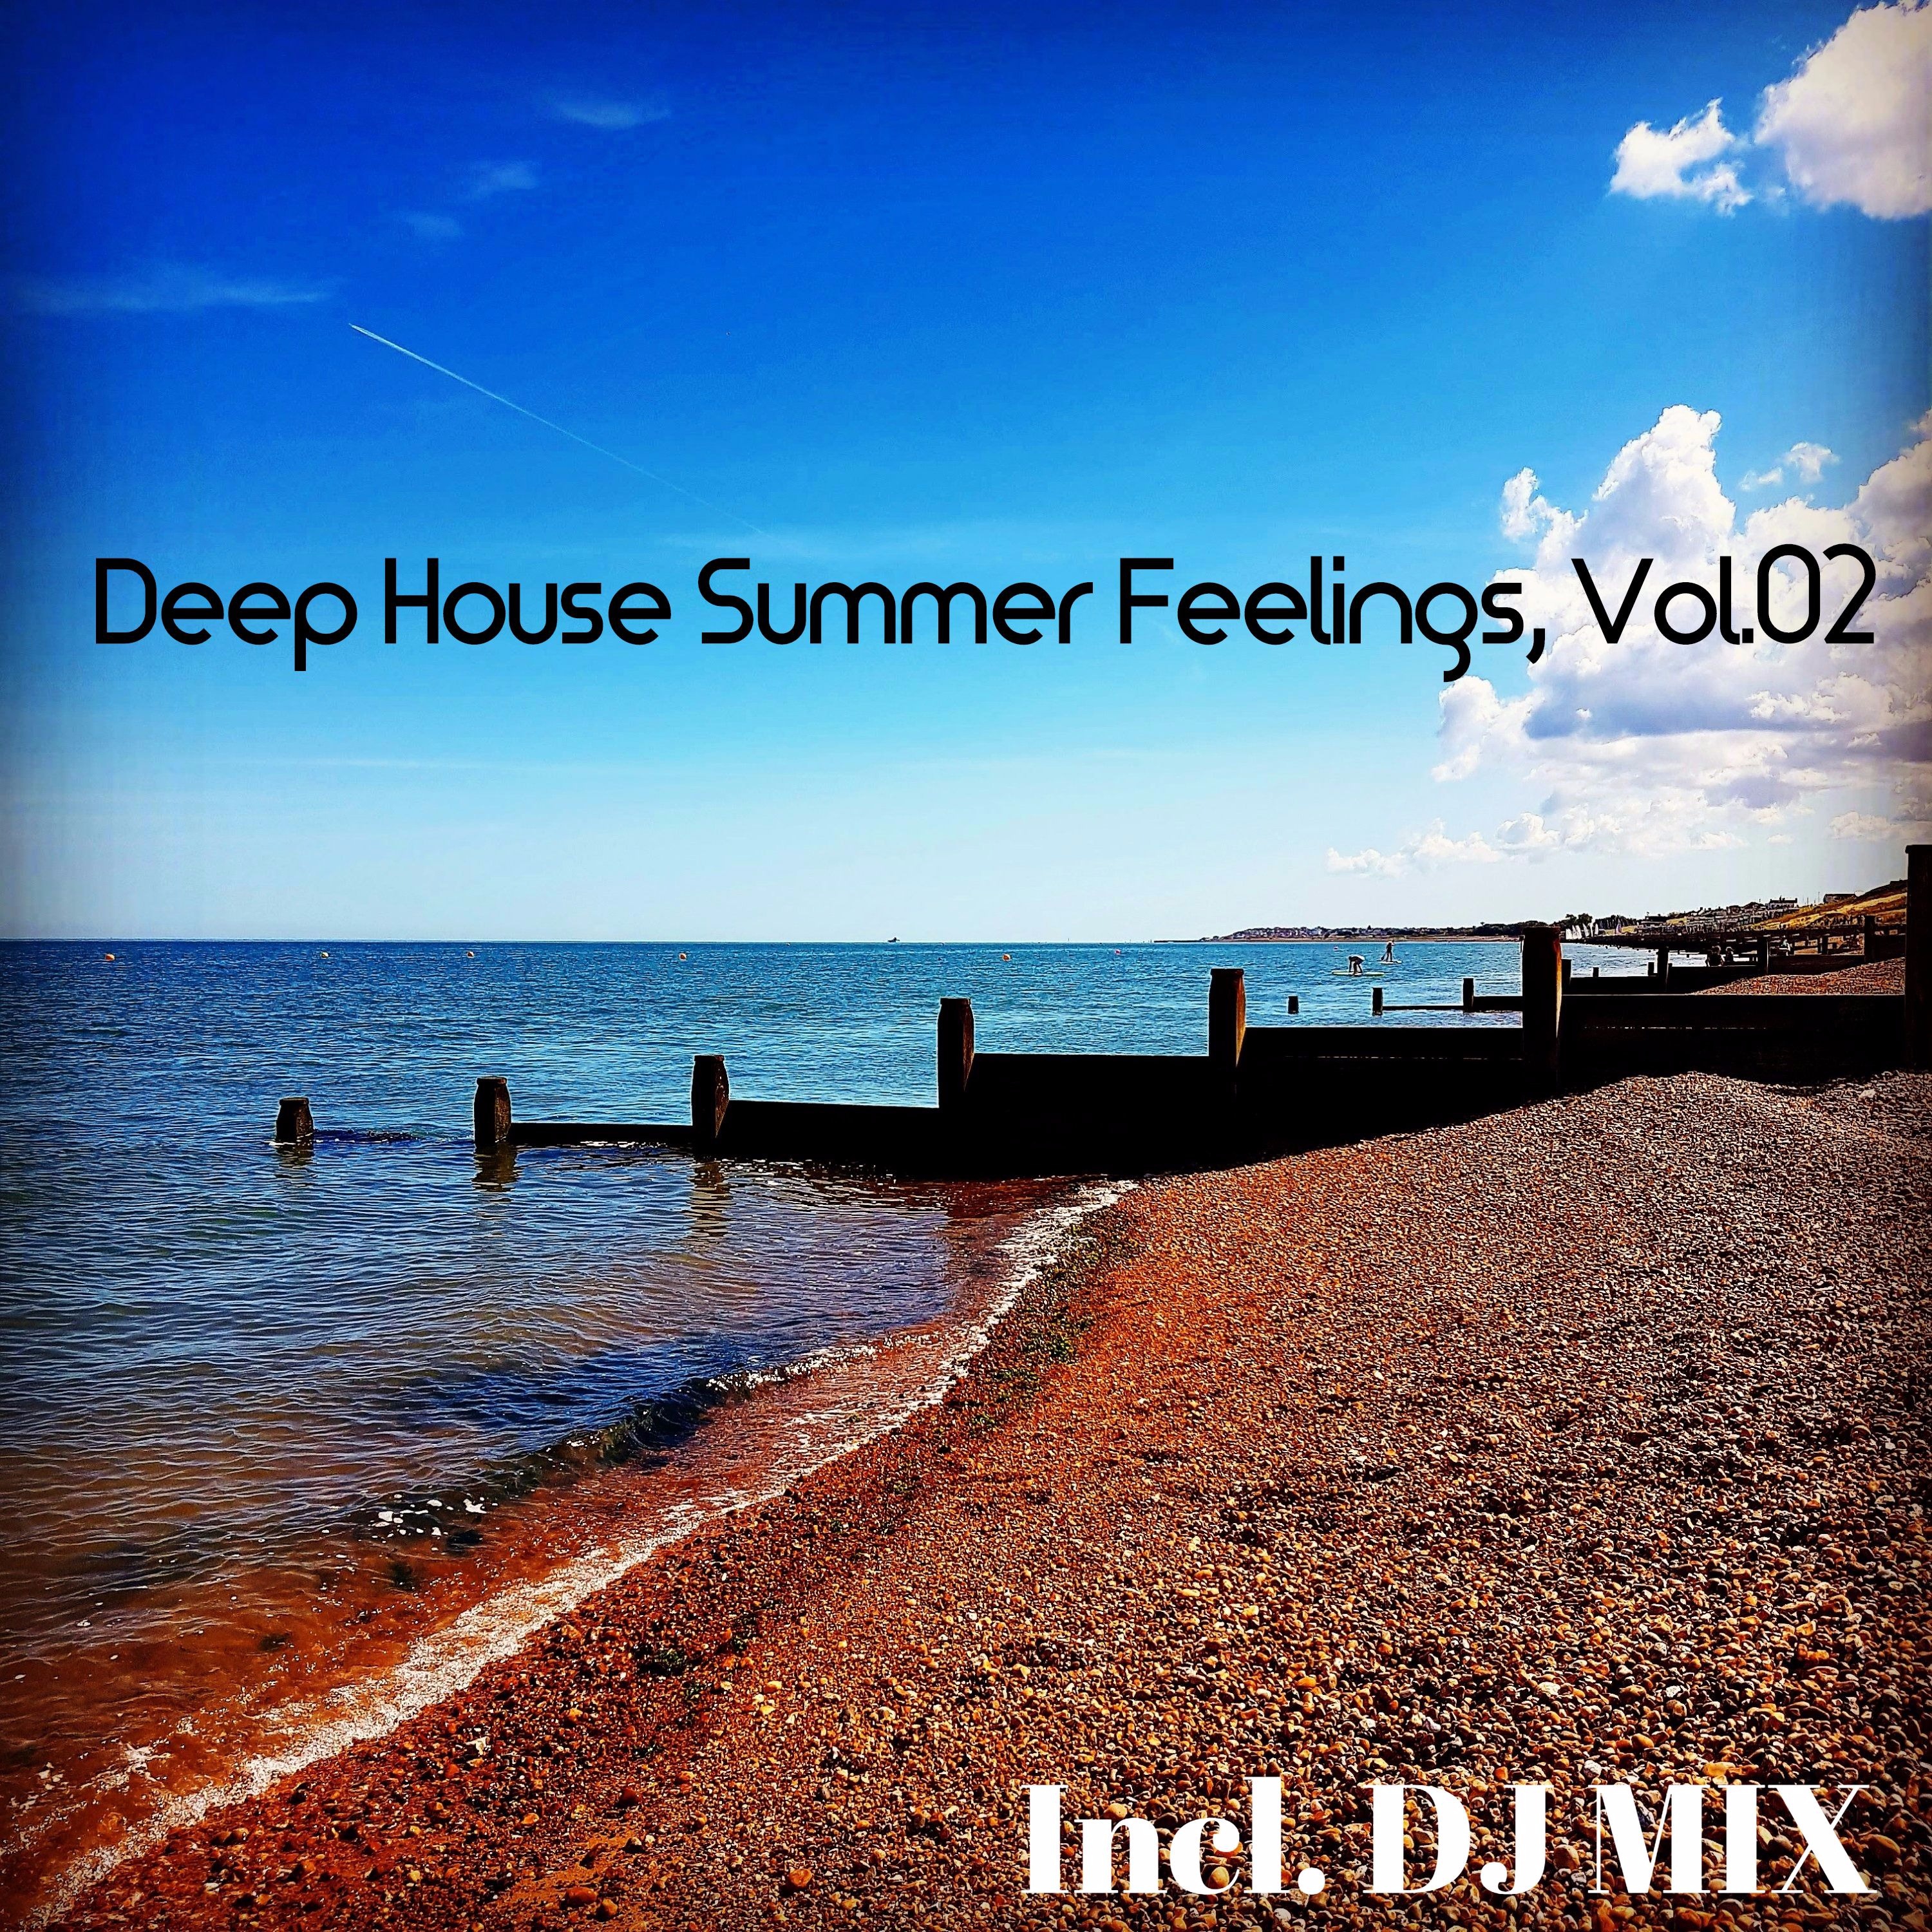 Deep House Summer Feelings, Vol. 02 (Mixed by Avi Pasko) [Continuous DJ Mix]